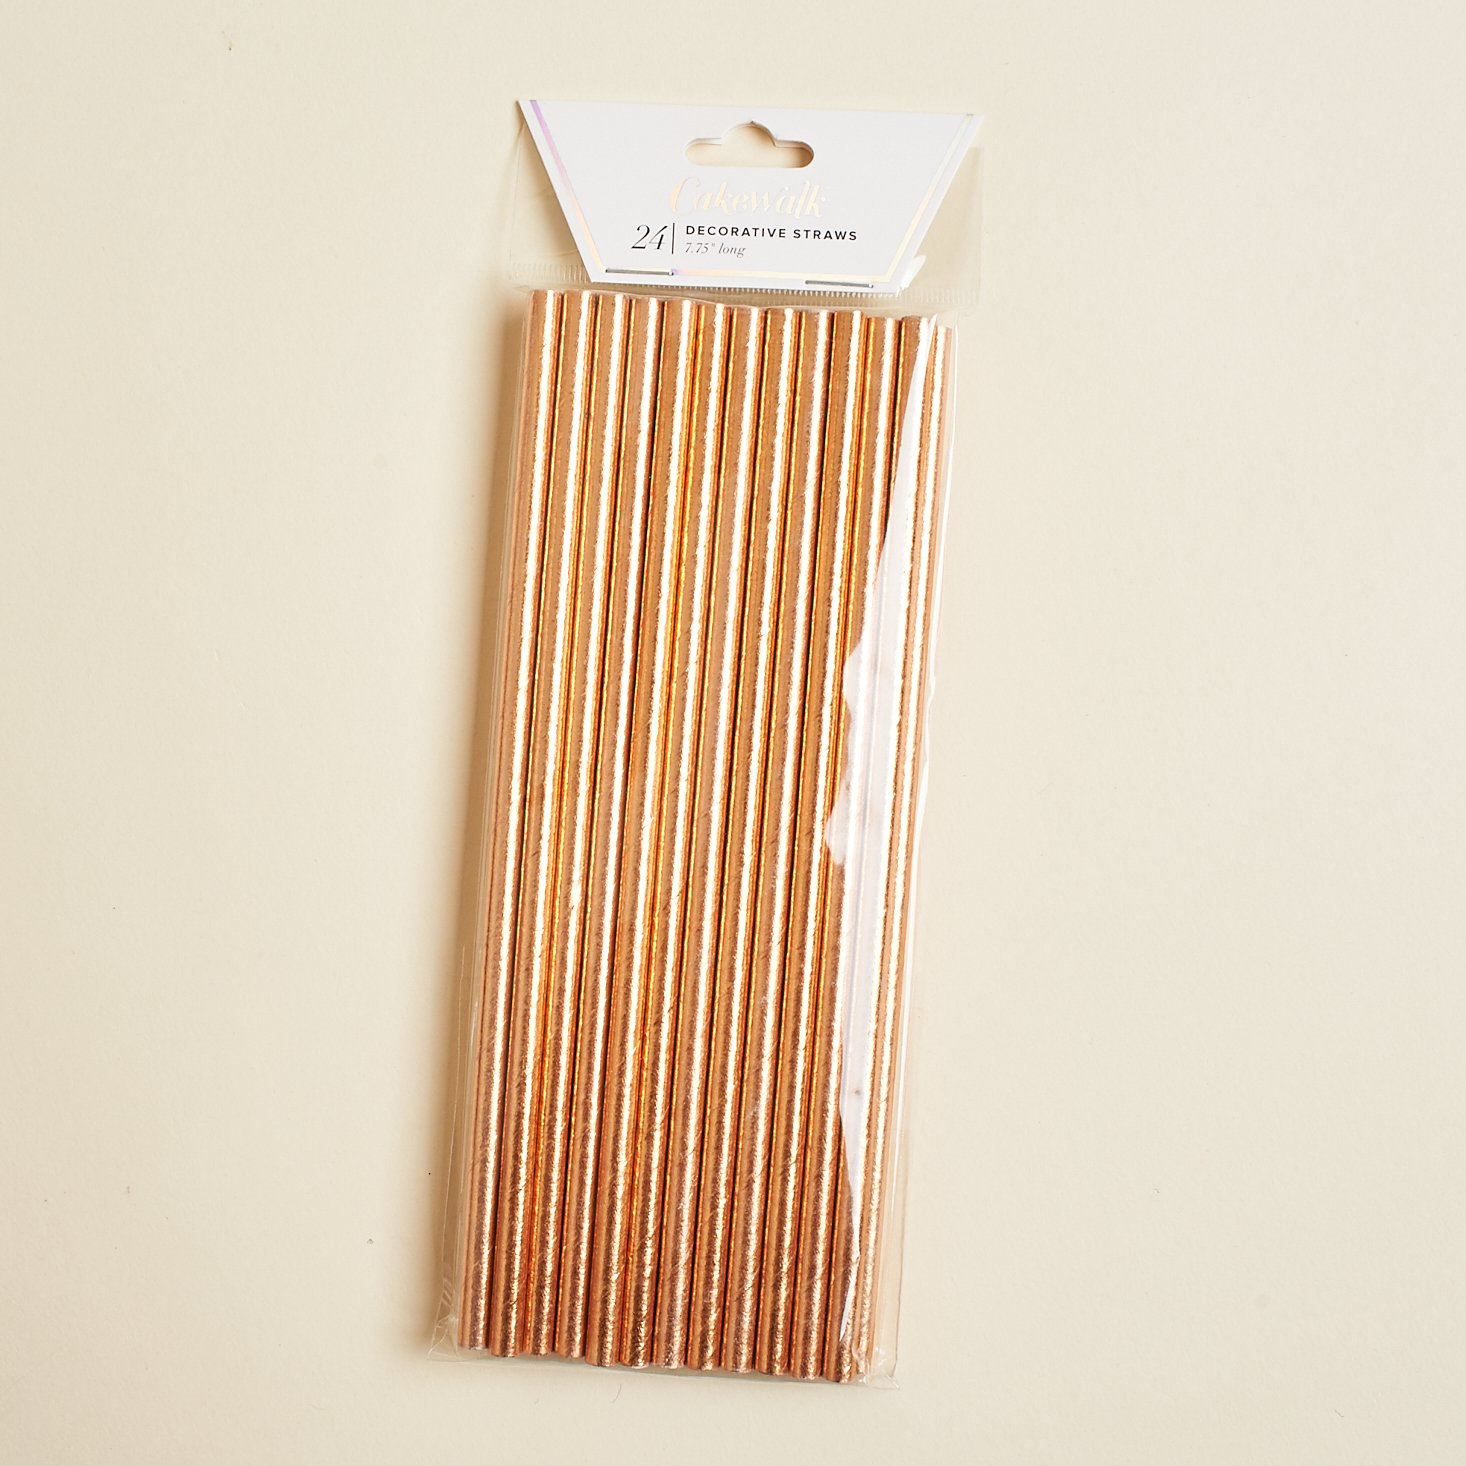 rose gold paper straws in clear packaging